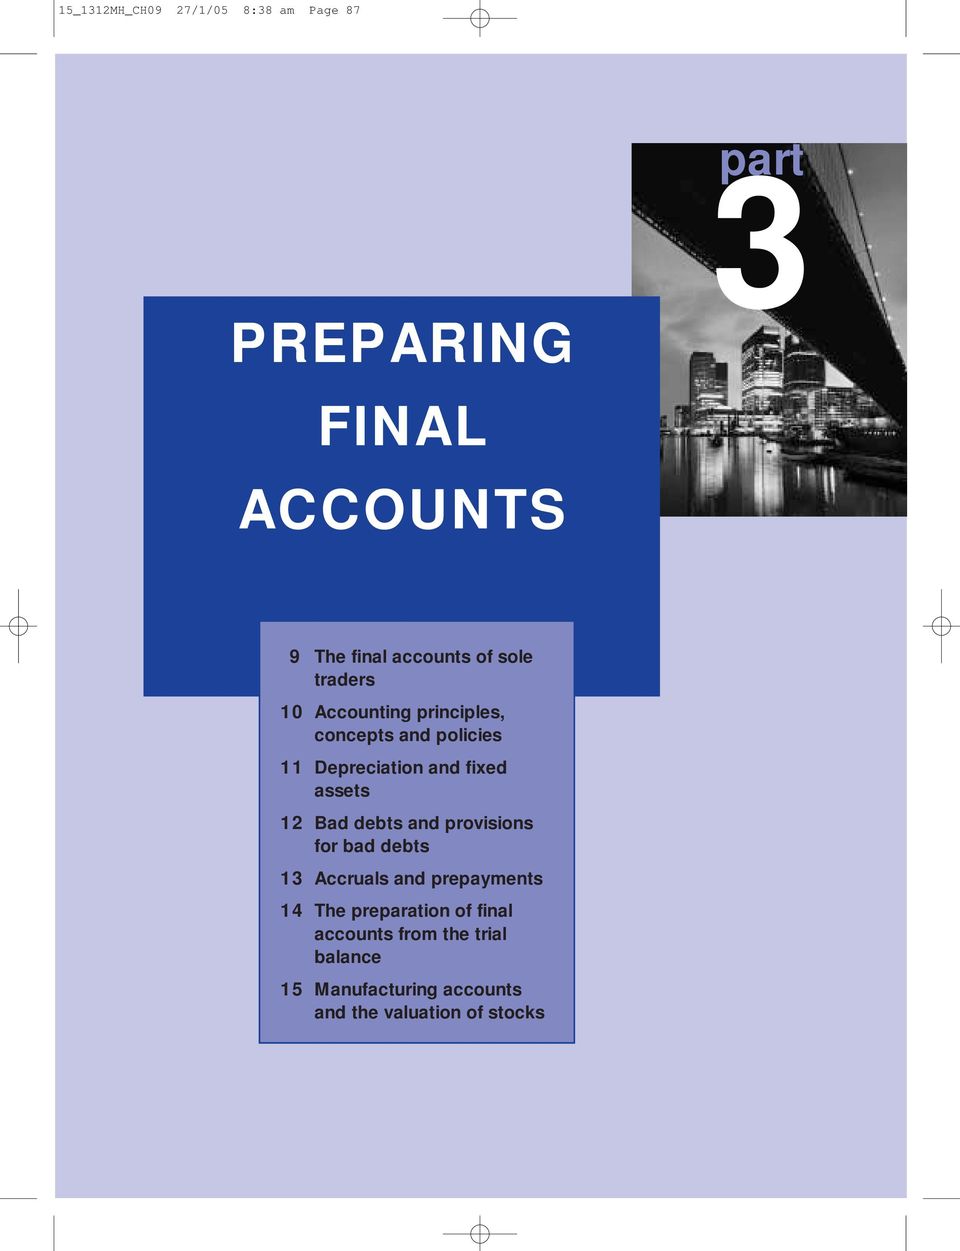 assets 12 Bad debts and provisions for bad debts 13 Accruals and prepayments 14 The